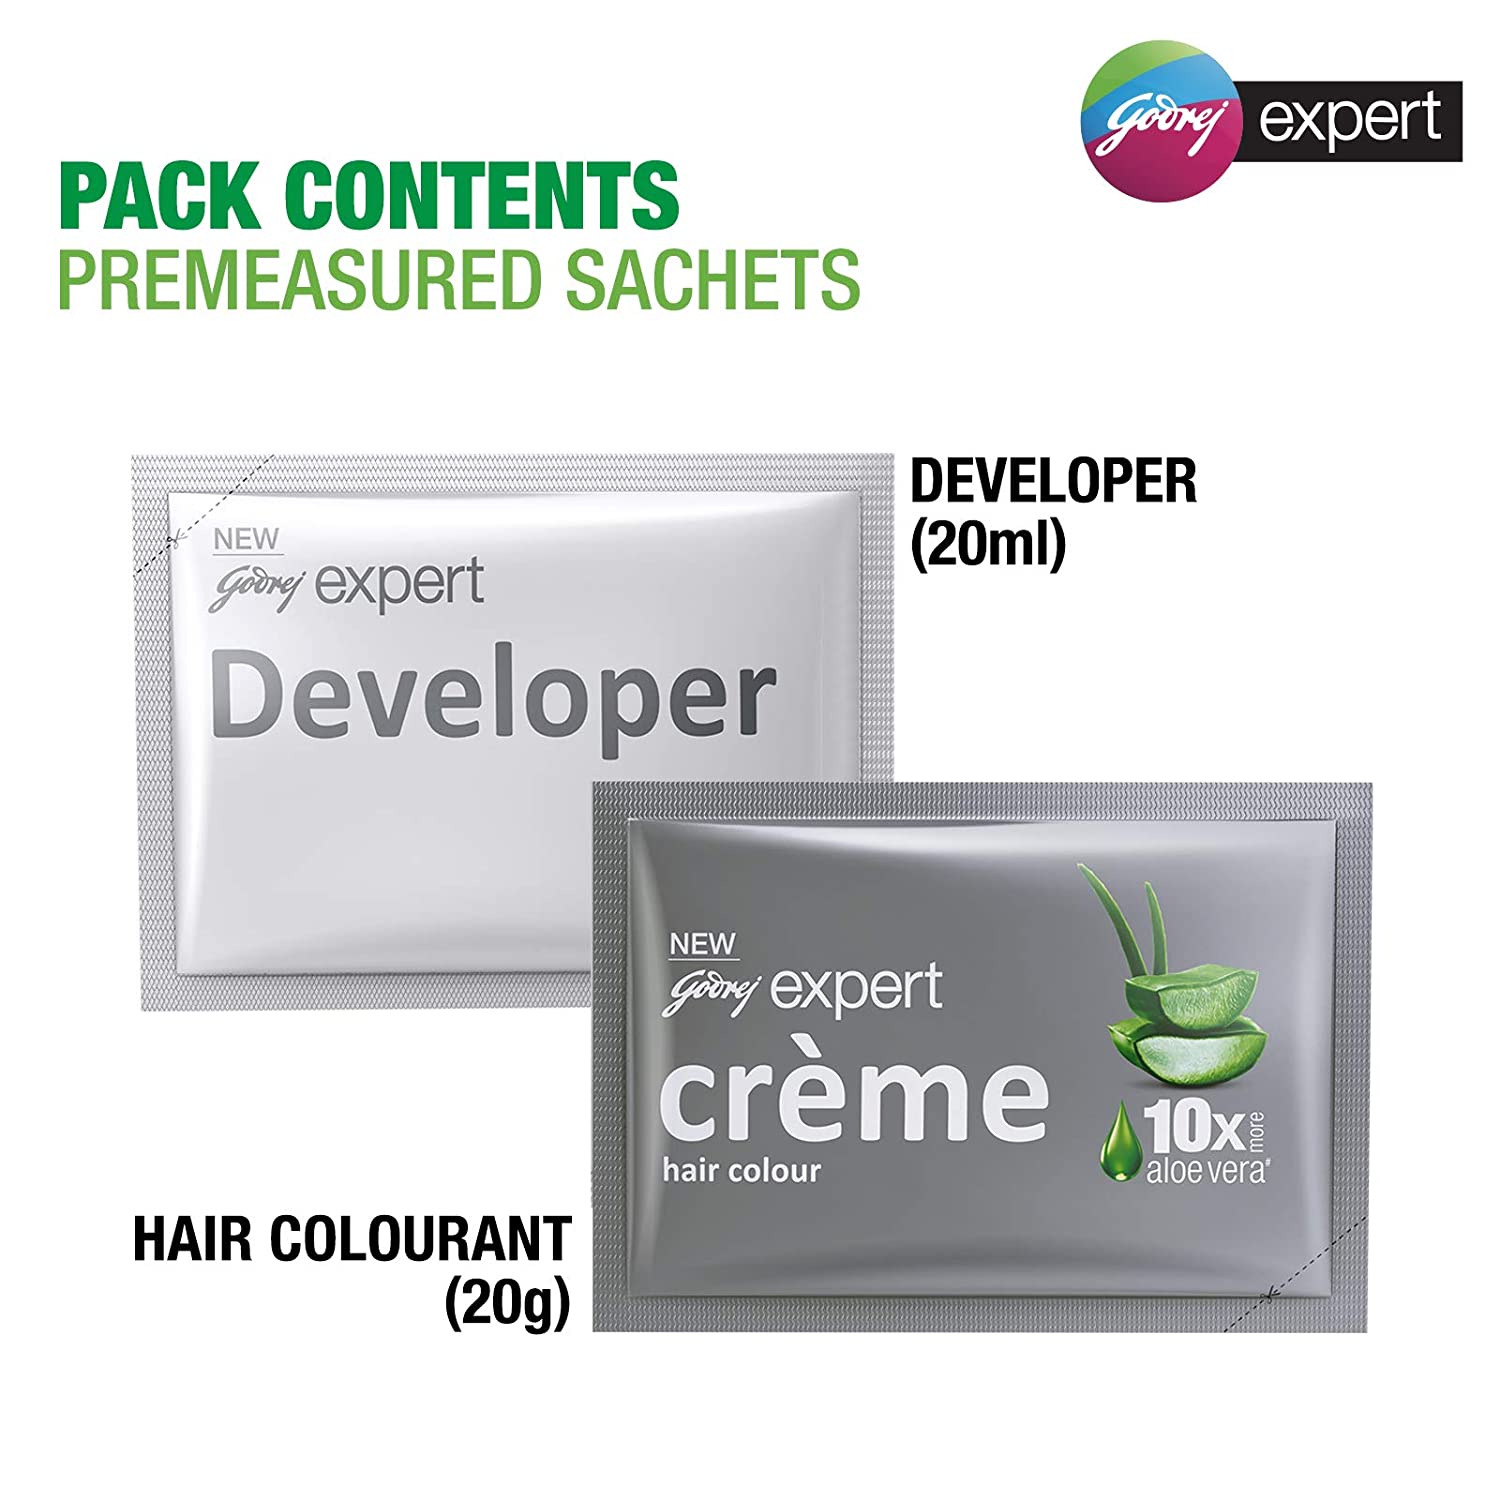 Godrej Expert Rich Creme Hair Colour - Natural Brown  (Pack of 4) - the  best price and delivery | Globally